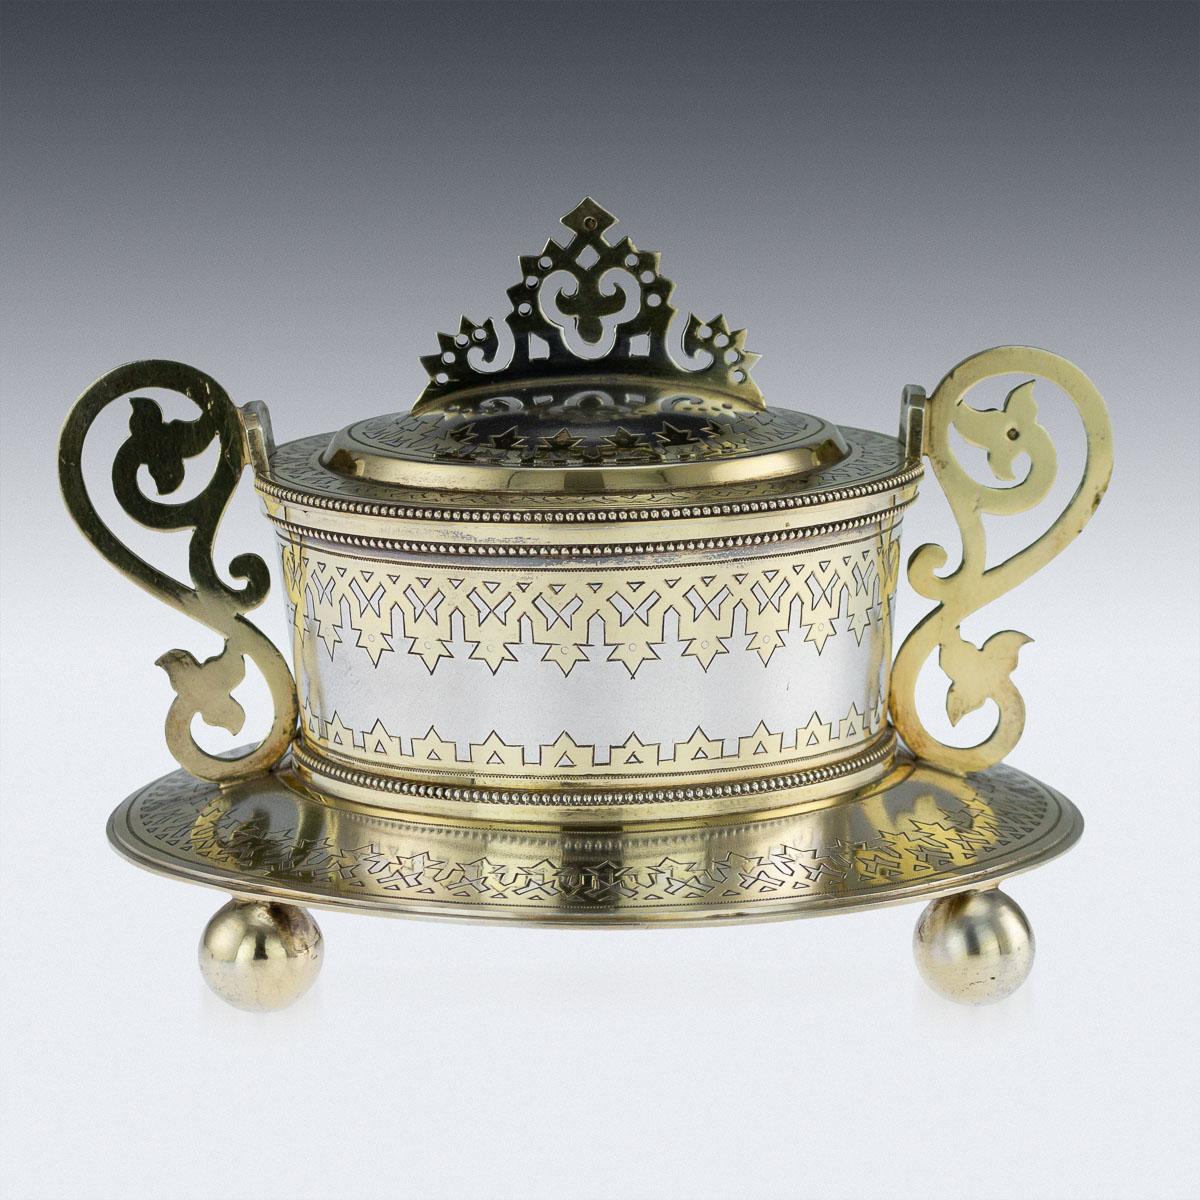 Antique 19th century imperial Russian solid silver caviar serving set, modelled as a barrel with fitted lid and elaborately designed handles, decoration is part gilt on matted silver ground, engraved with geometrical designs, simulating ice or